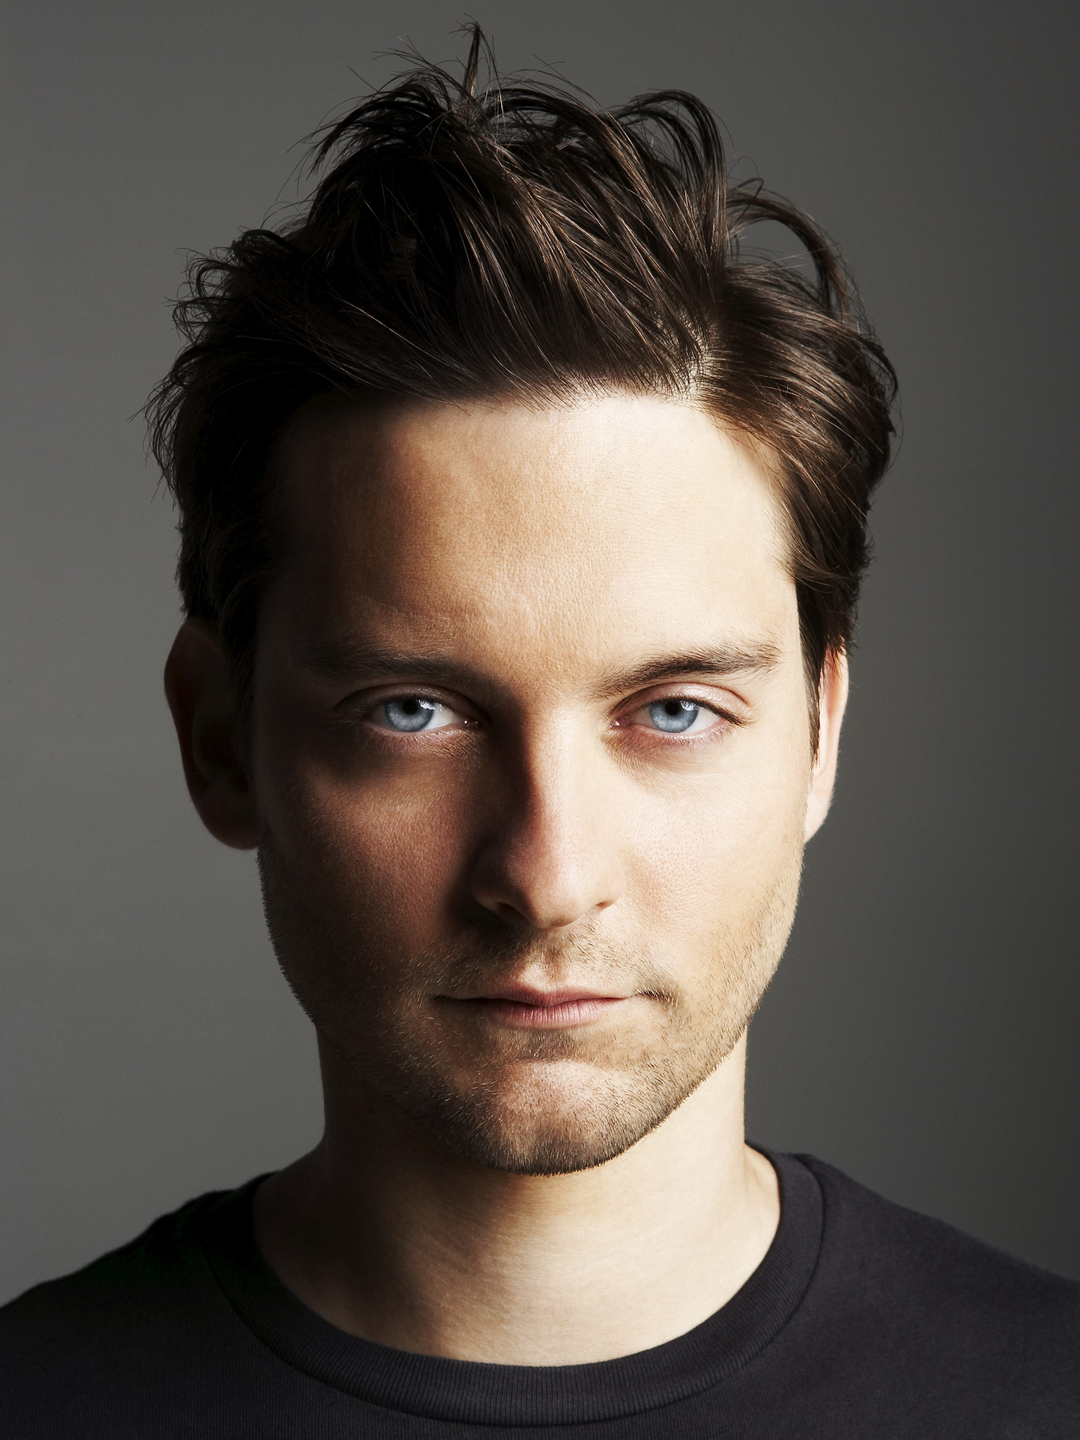 Tobey Maguire his zodiac sign